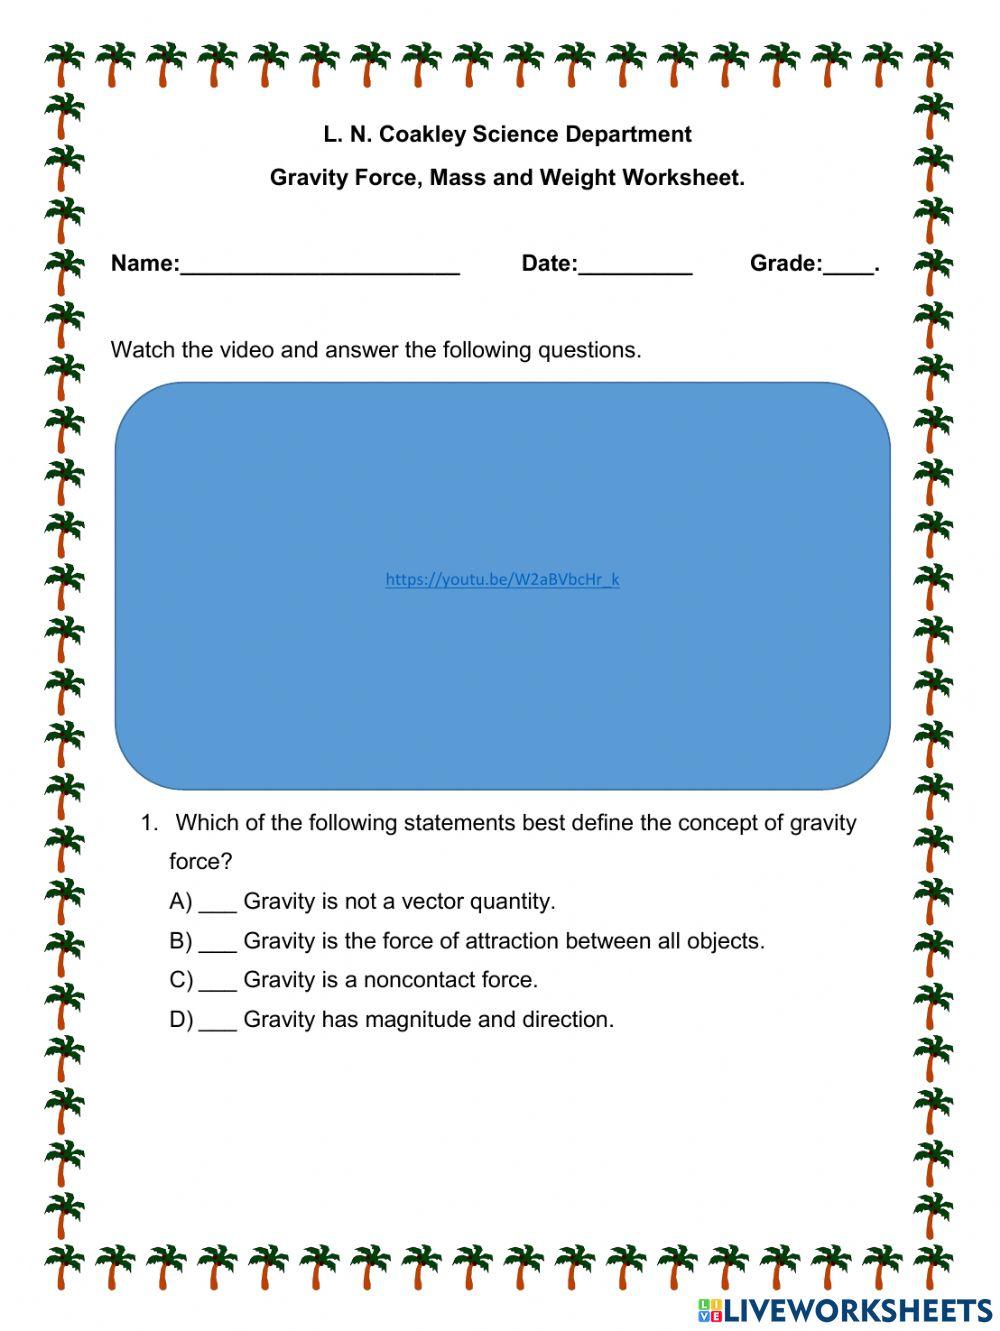 Gravity Force, Mass and Weight Worksheet.